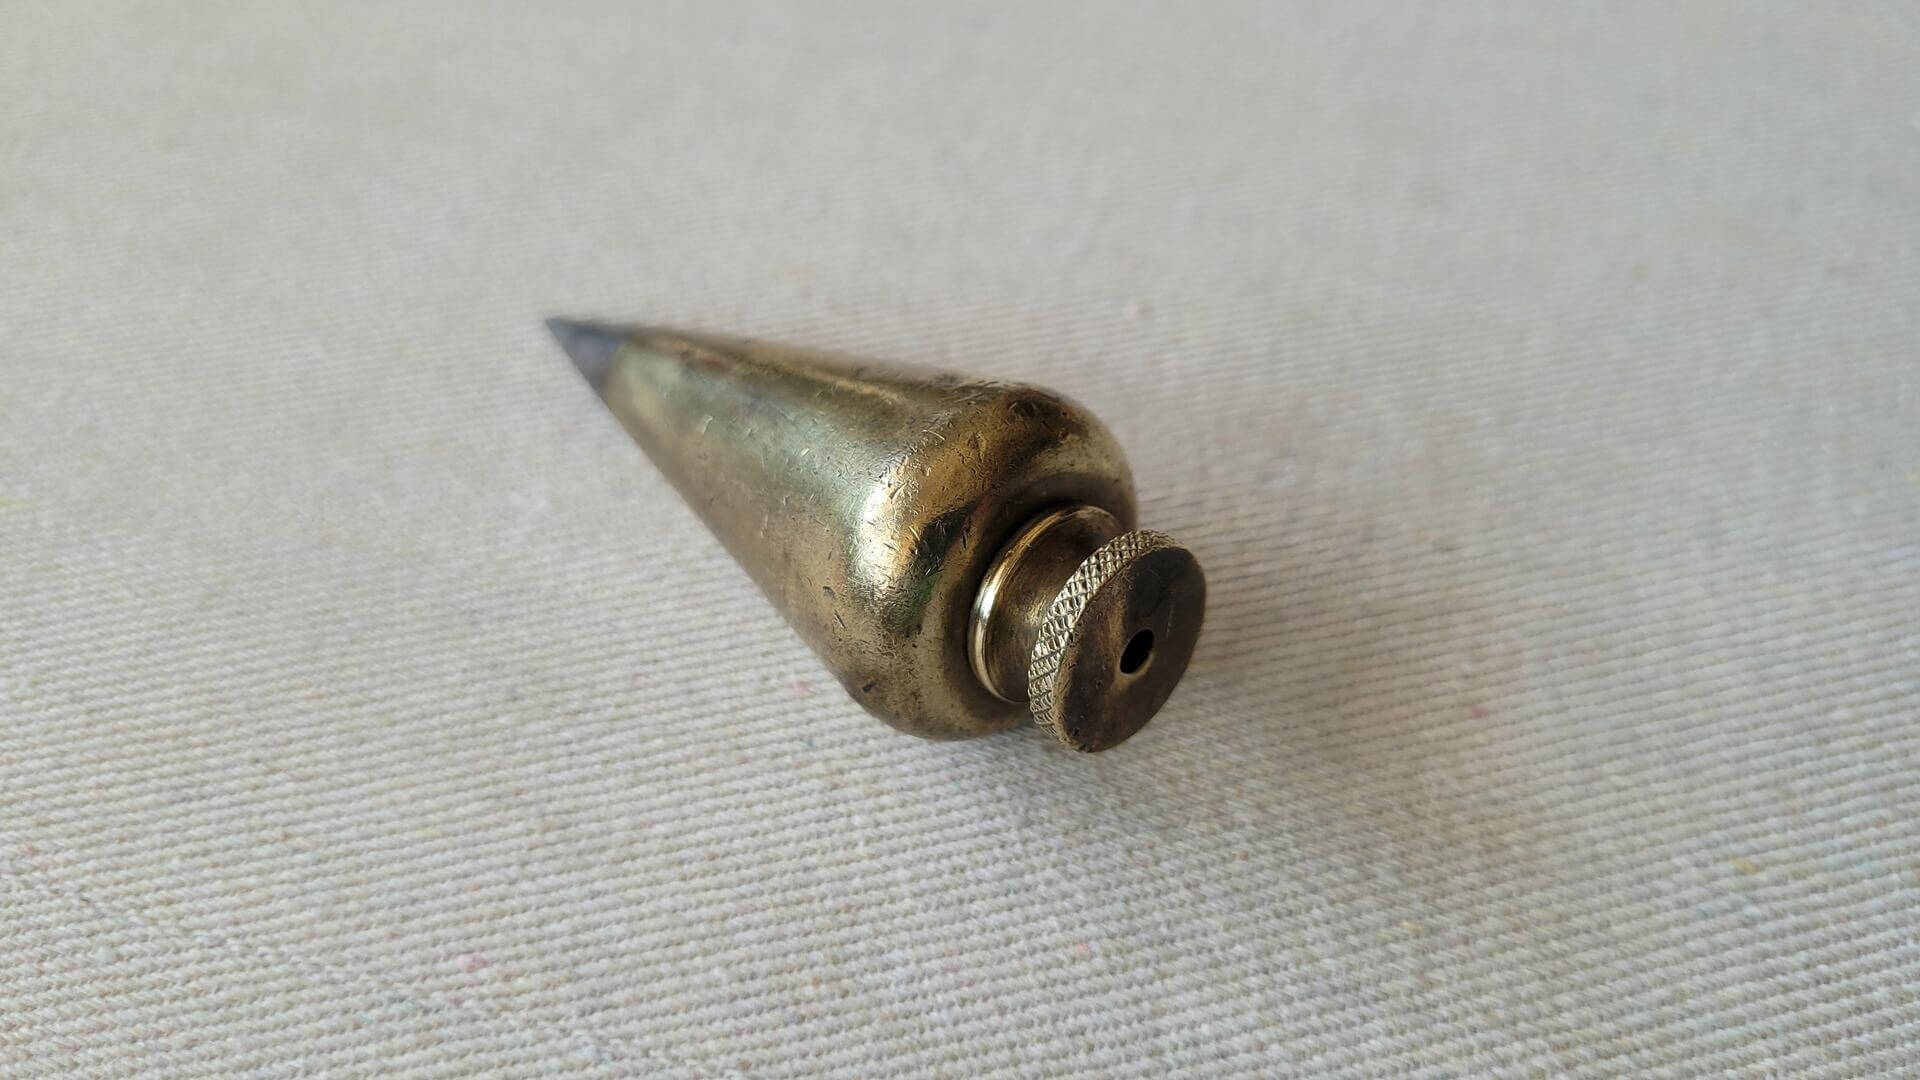 Beautiful antique turnip shaped solid brass plumb bob with the steel tip 5oz / 146g. Vintage marking and measuring collectible tools